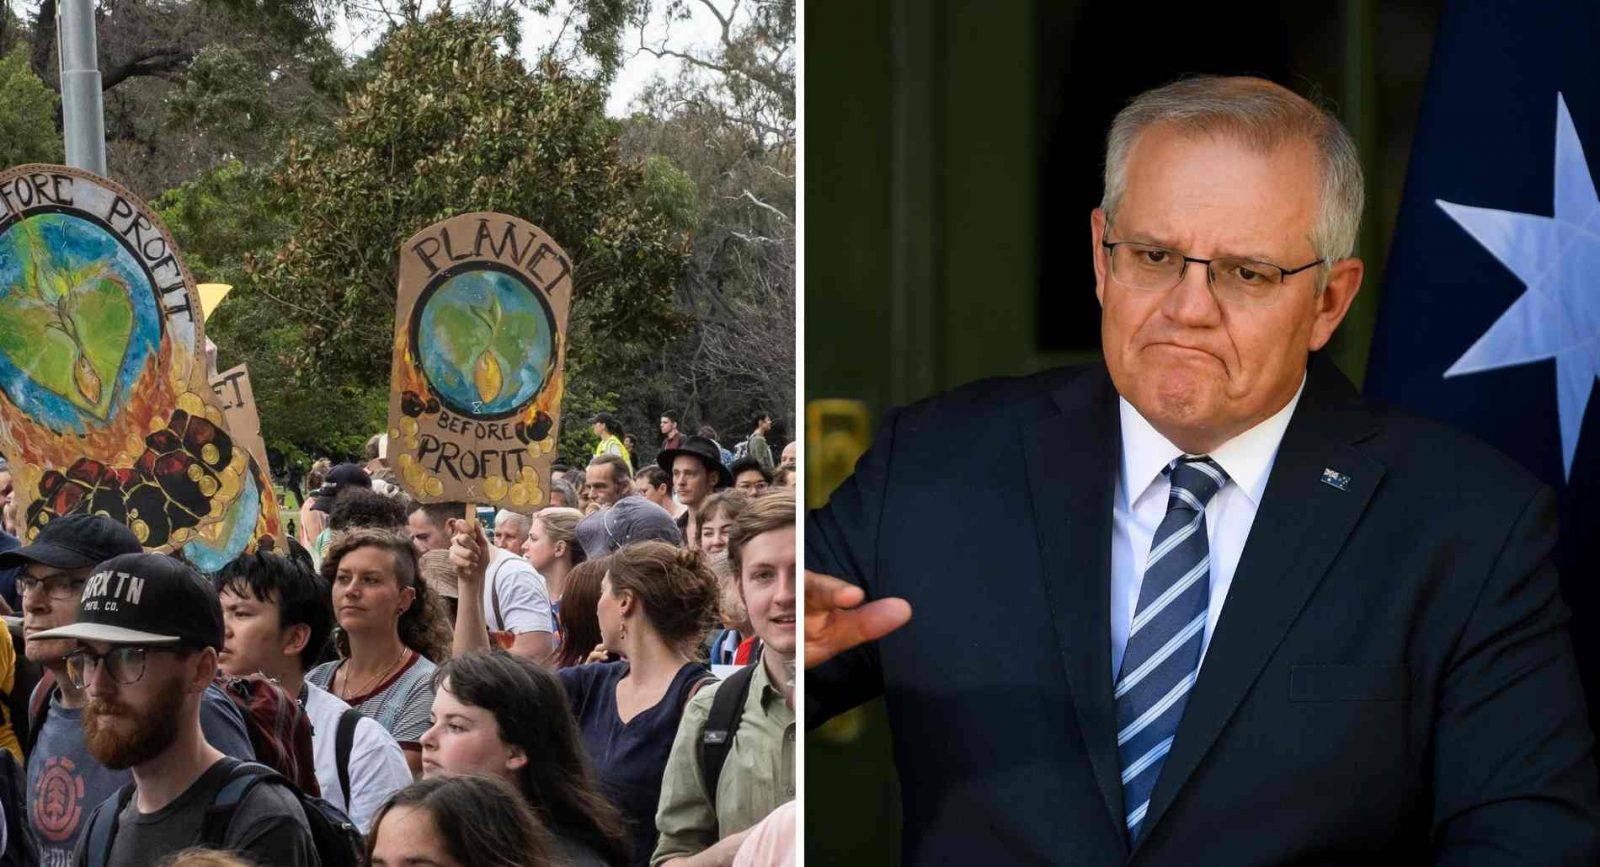 A split image - on the left, a crowd of school climate strikers. On the right, an image of Prime Minister Scott Morrison.